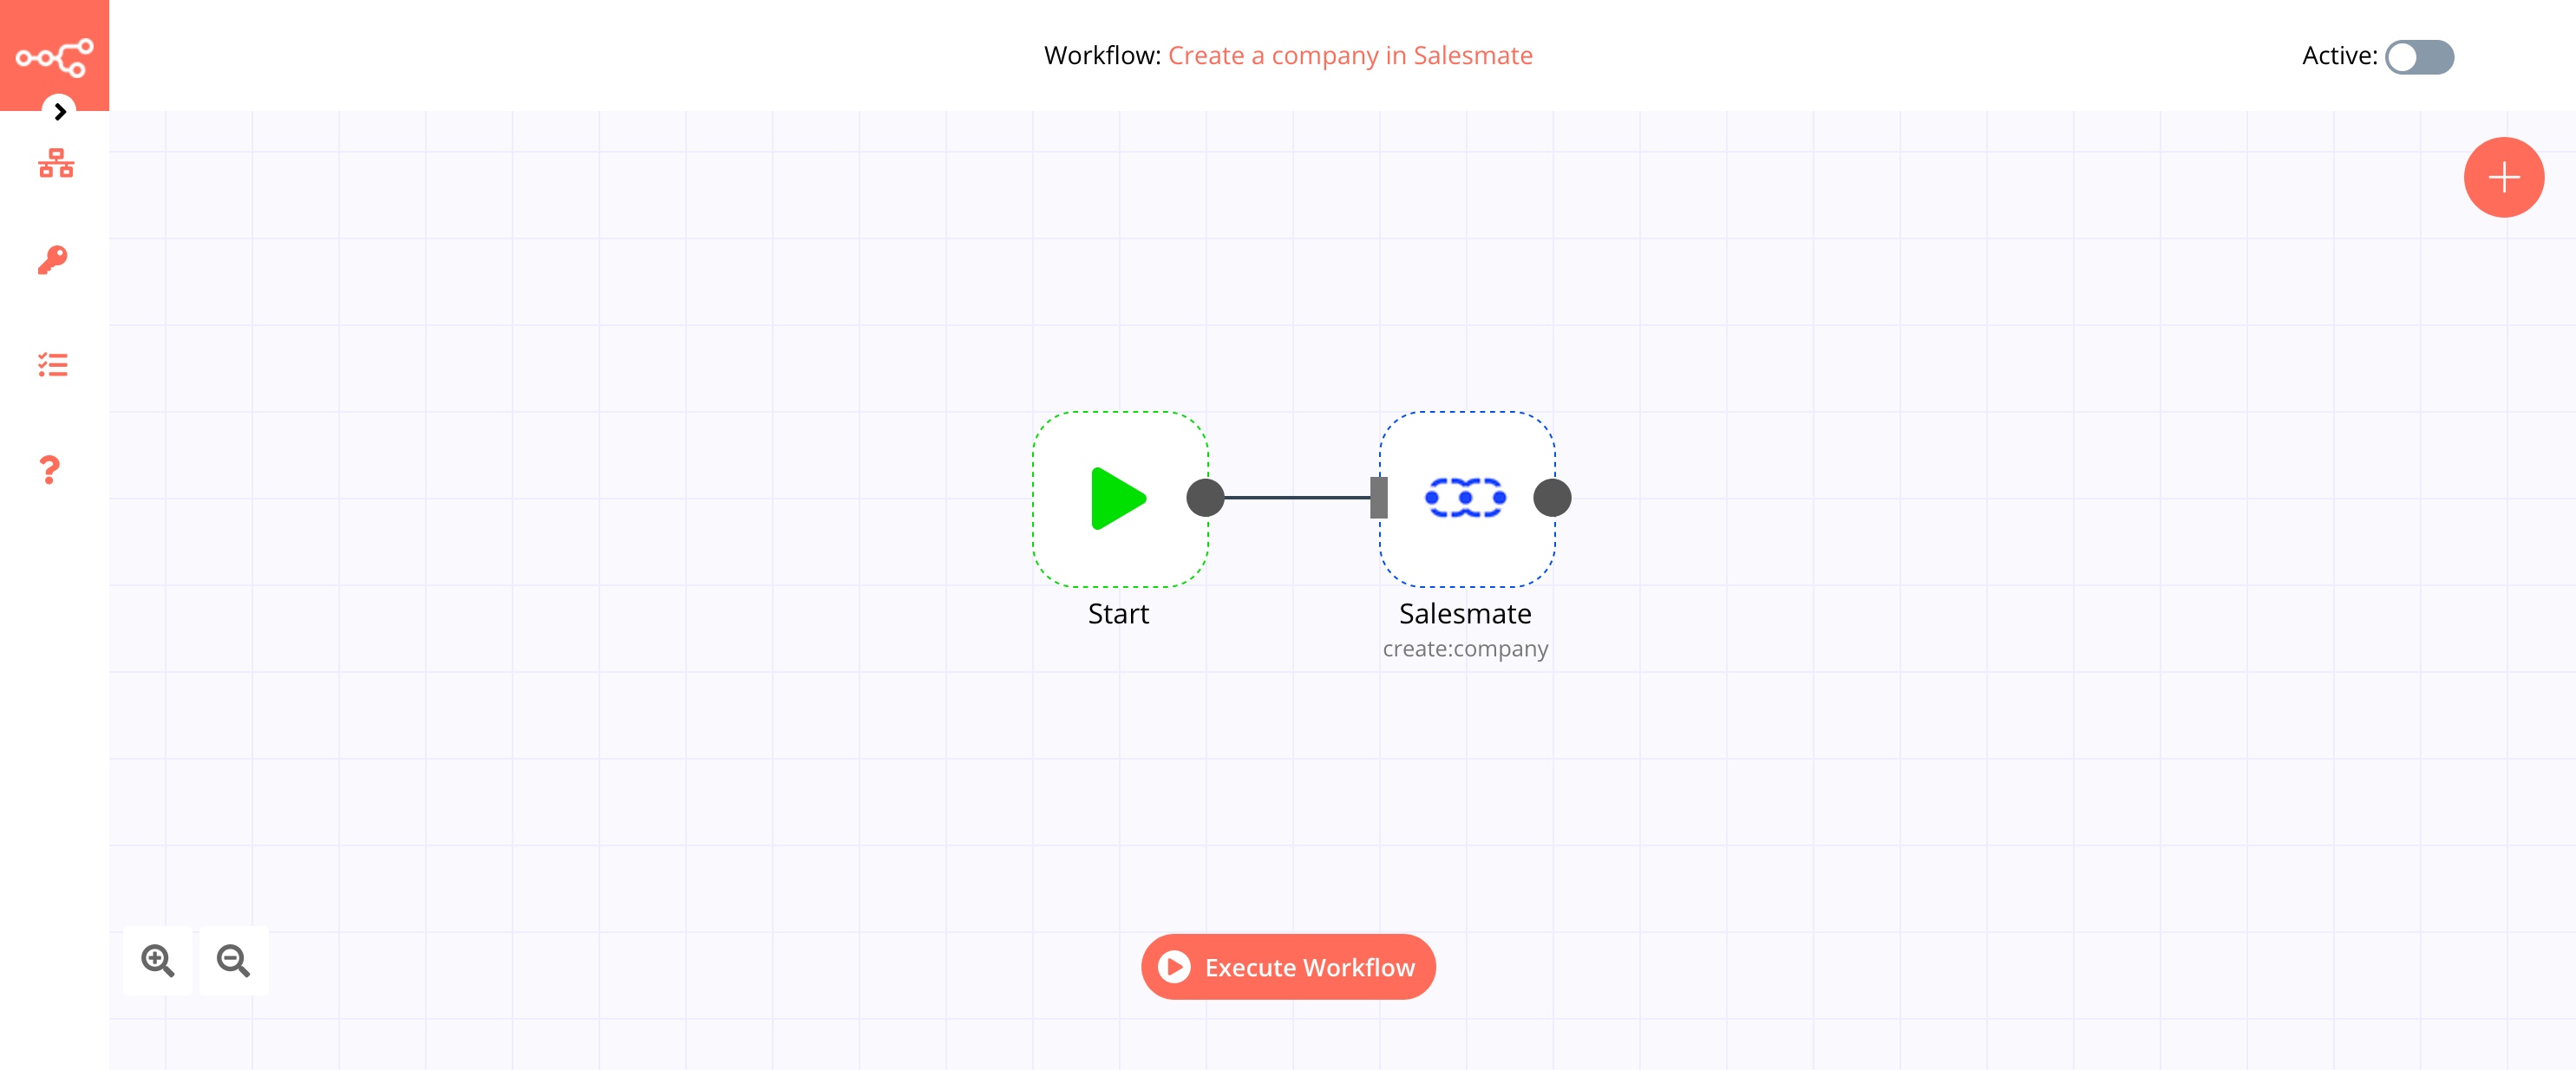 A workflow with the Salesmate node